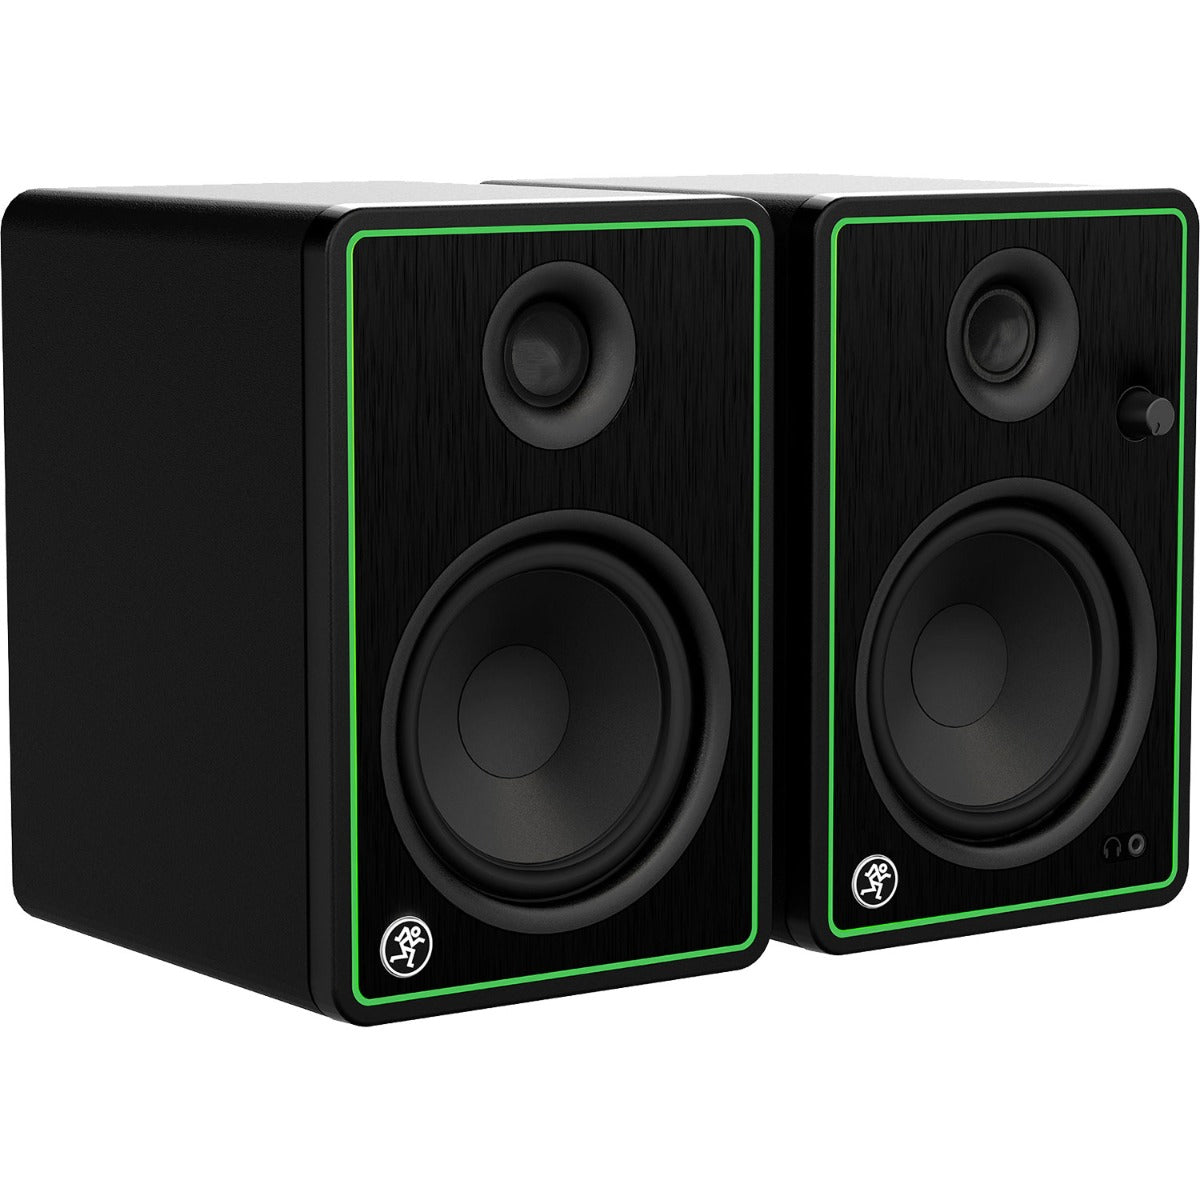 3/4 view of Mackie CR5-X 5" Creative Reference Multimedia Monitors showing front, left side and top